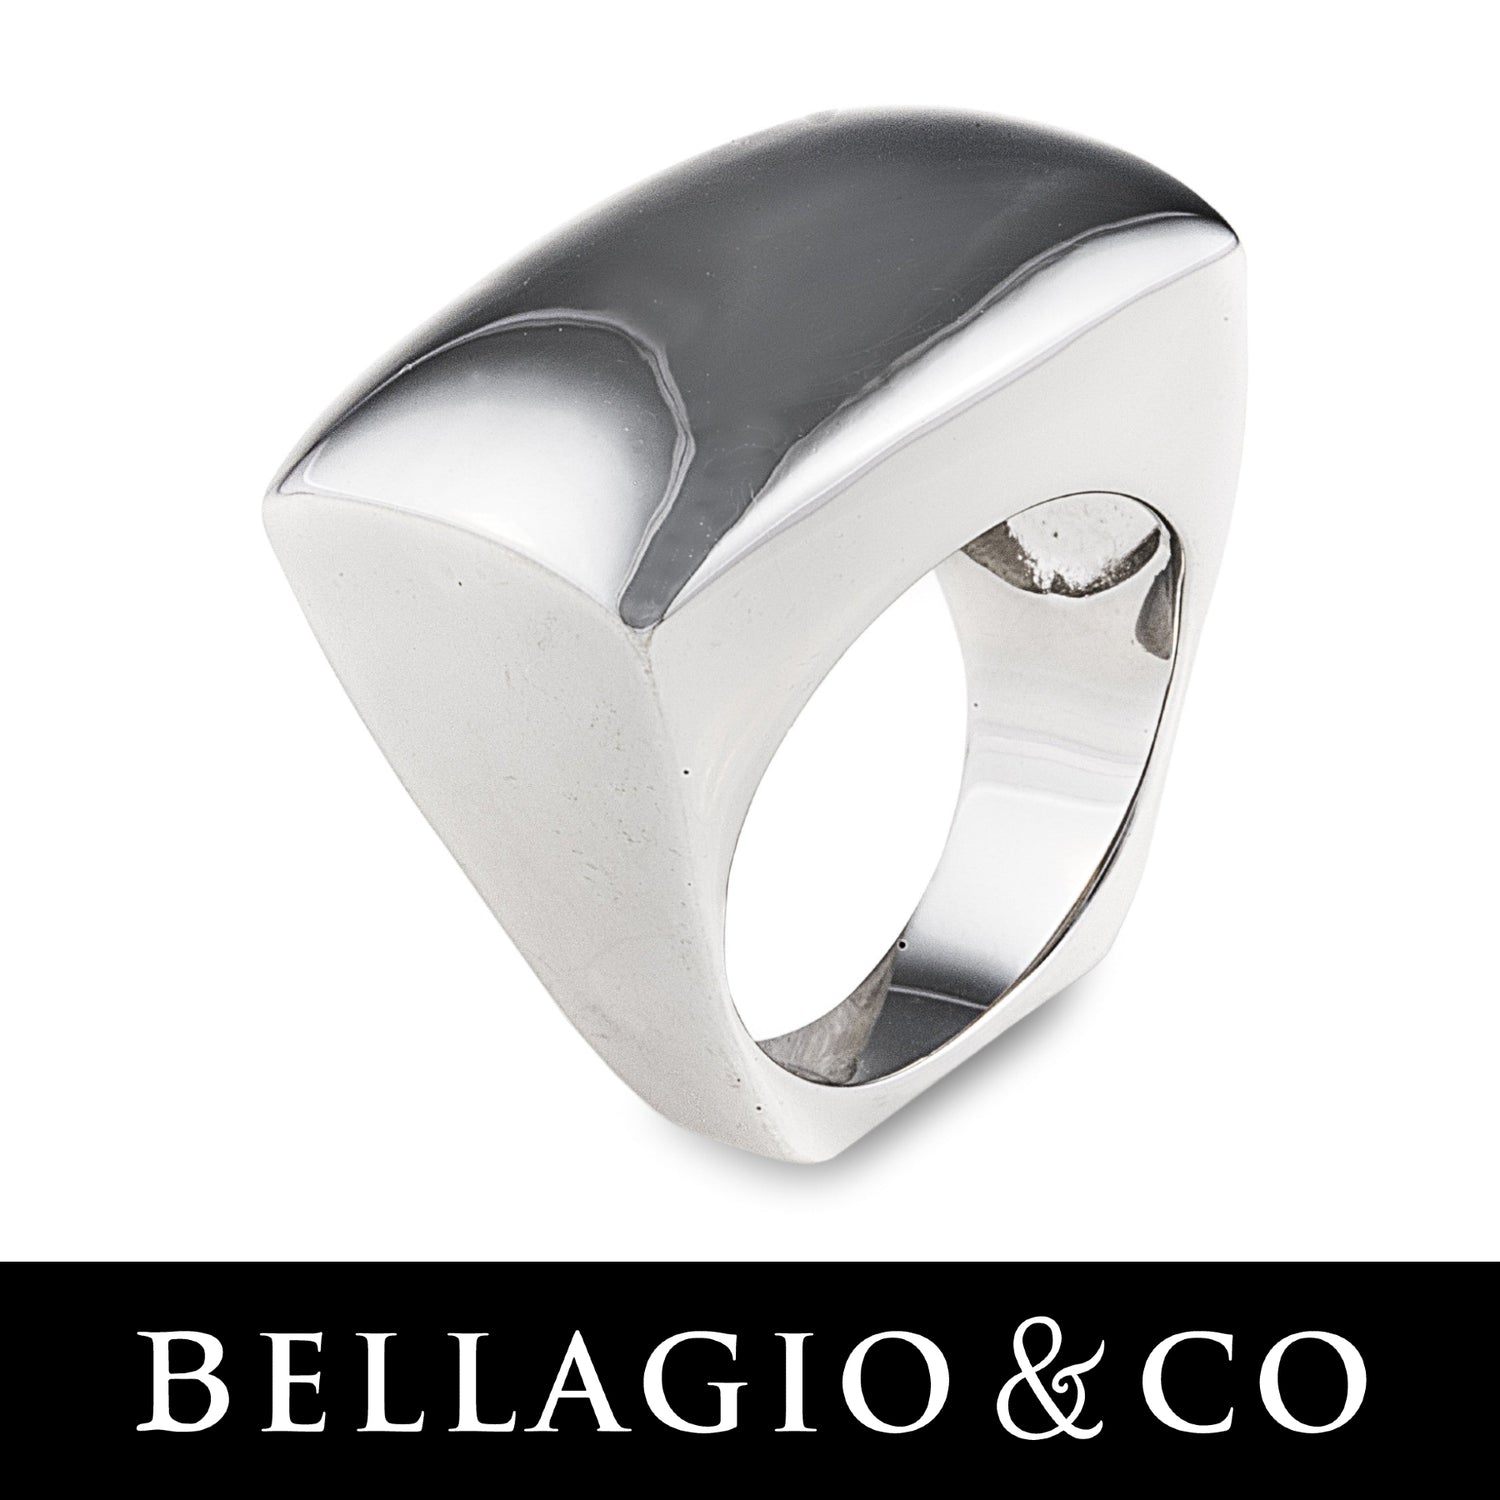 Jewellery with a modern edge by Bellagio & Co. Worldwide shipping